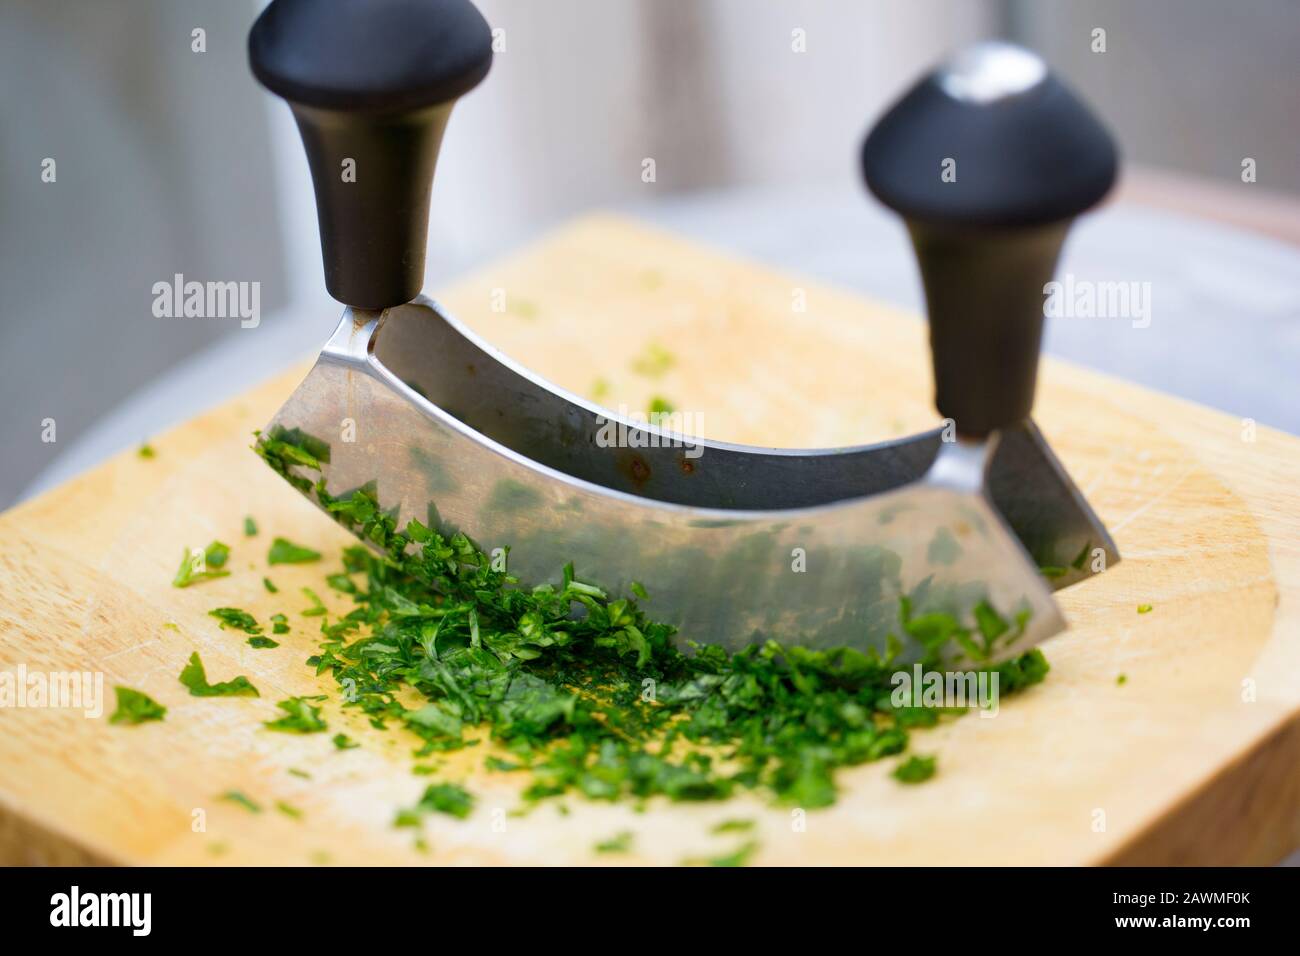 https://c8.alamy.com/comp/2AWMF0K/parsley-on-a-wooden-chopping-board-that-has-been-chopped-with-a-herb-cutter-england-uk-gb-2AWMF0K.jpg